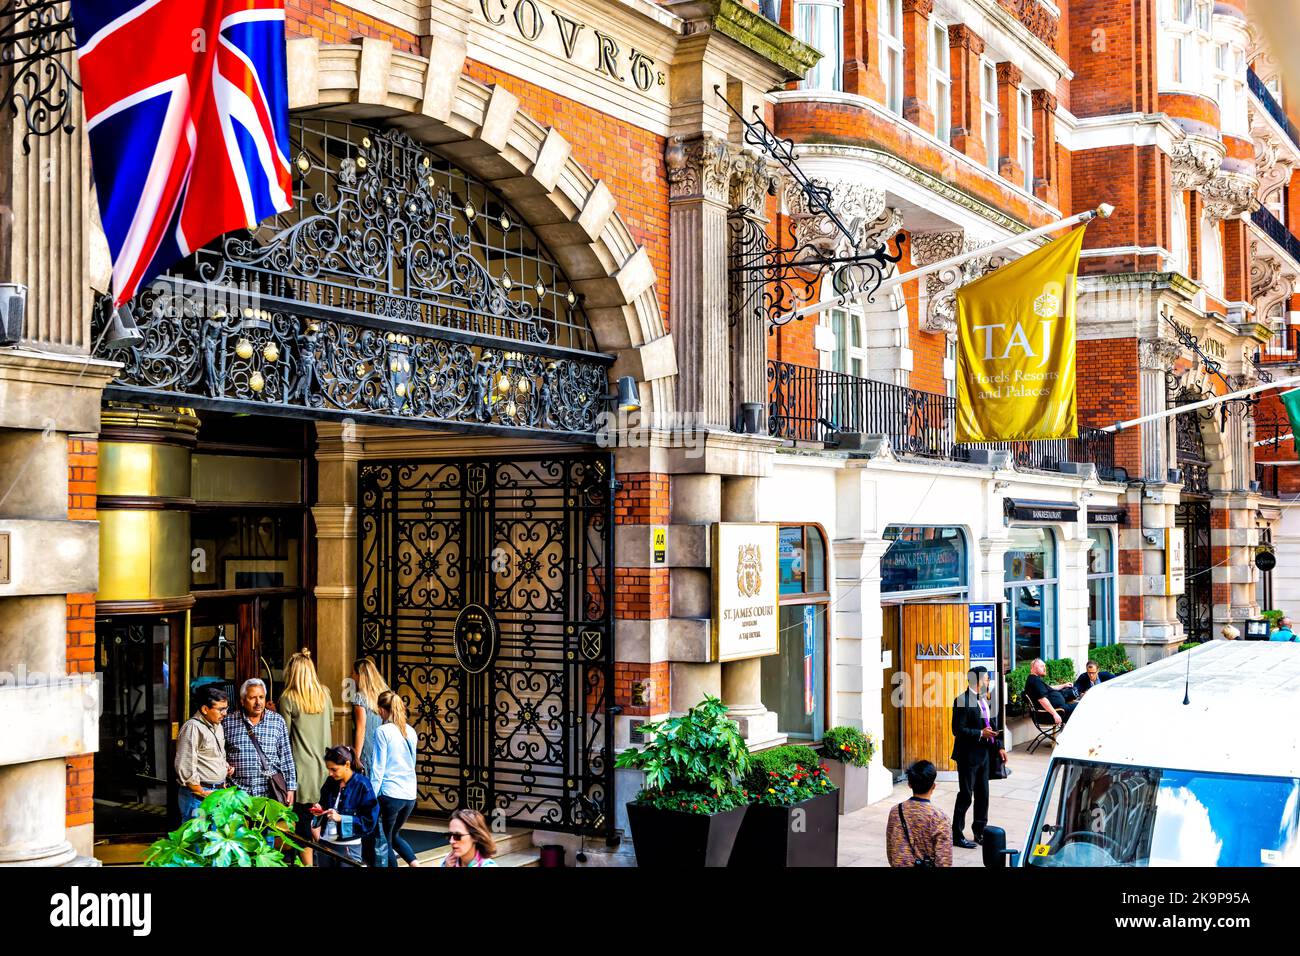 London, United Kingdom - June 22, 2018: St. James' Court Taj hotel resort entrance sign with Indian people tourists in city of Westminster Stock Photo